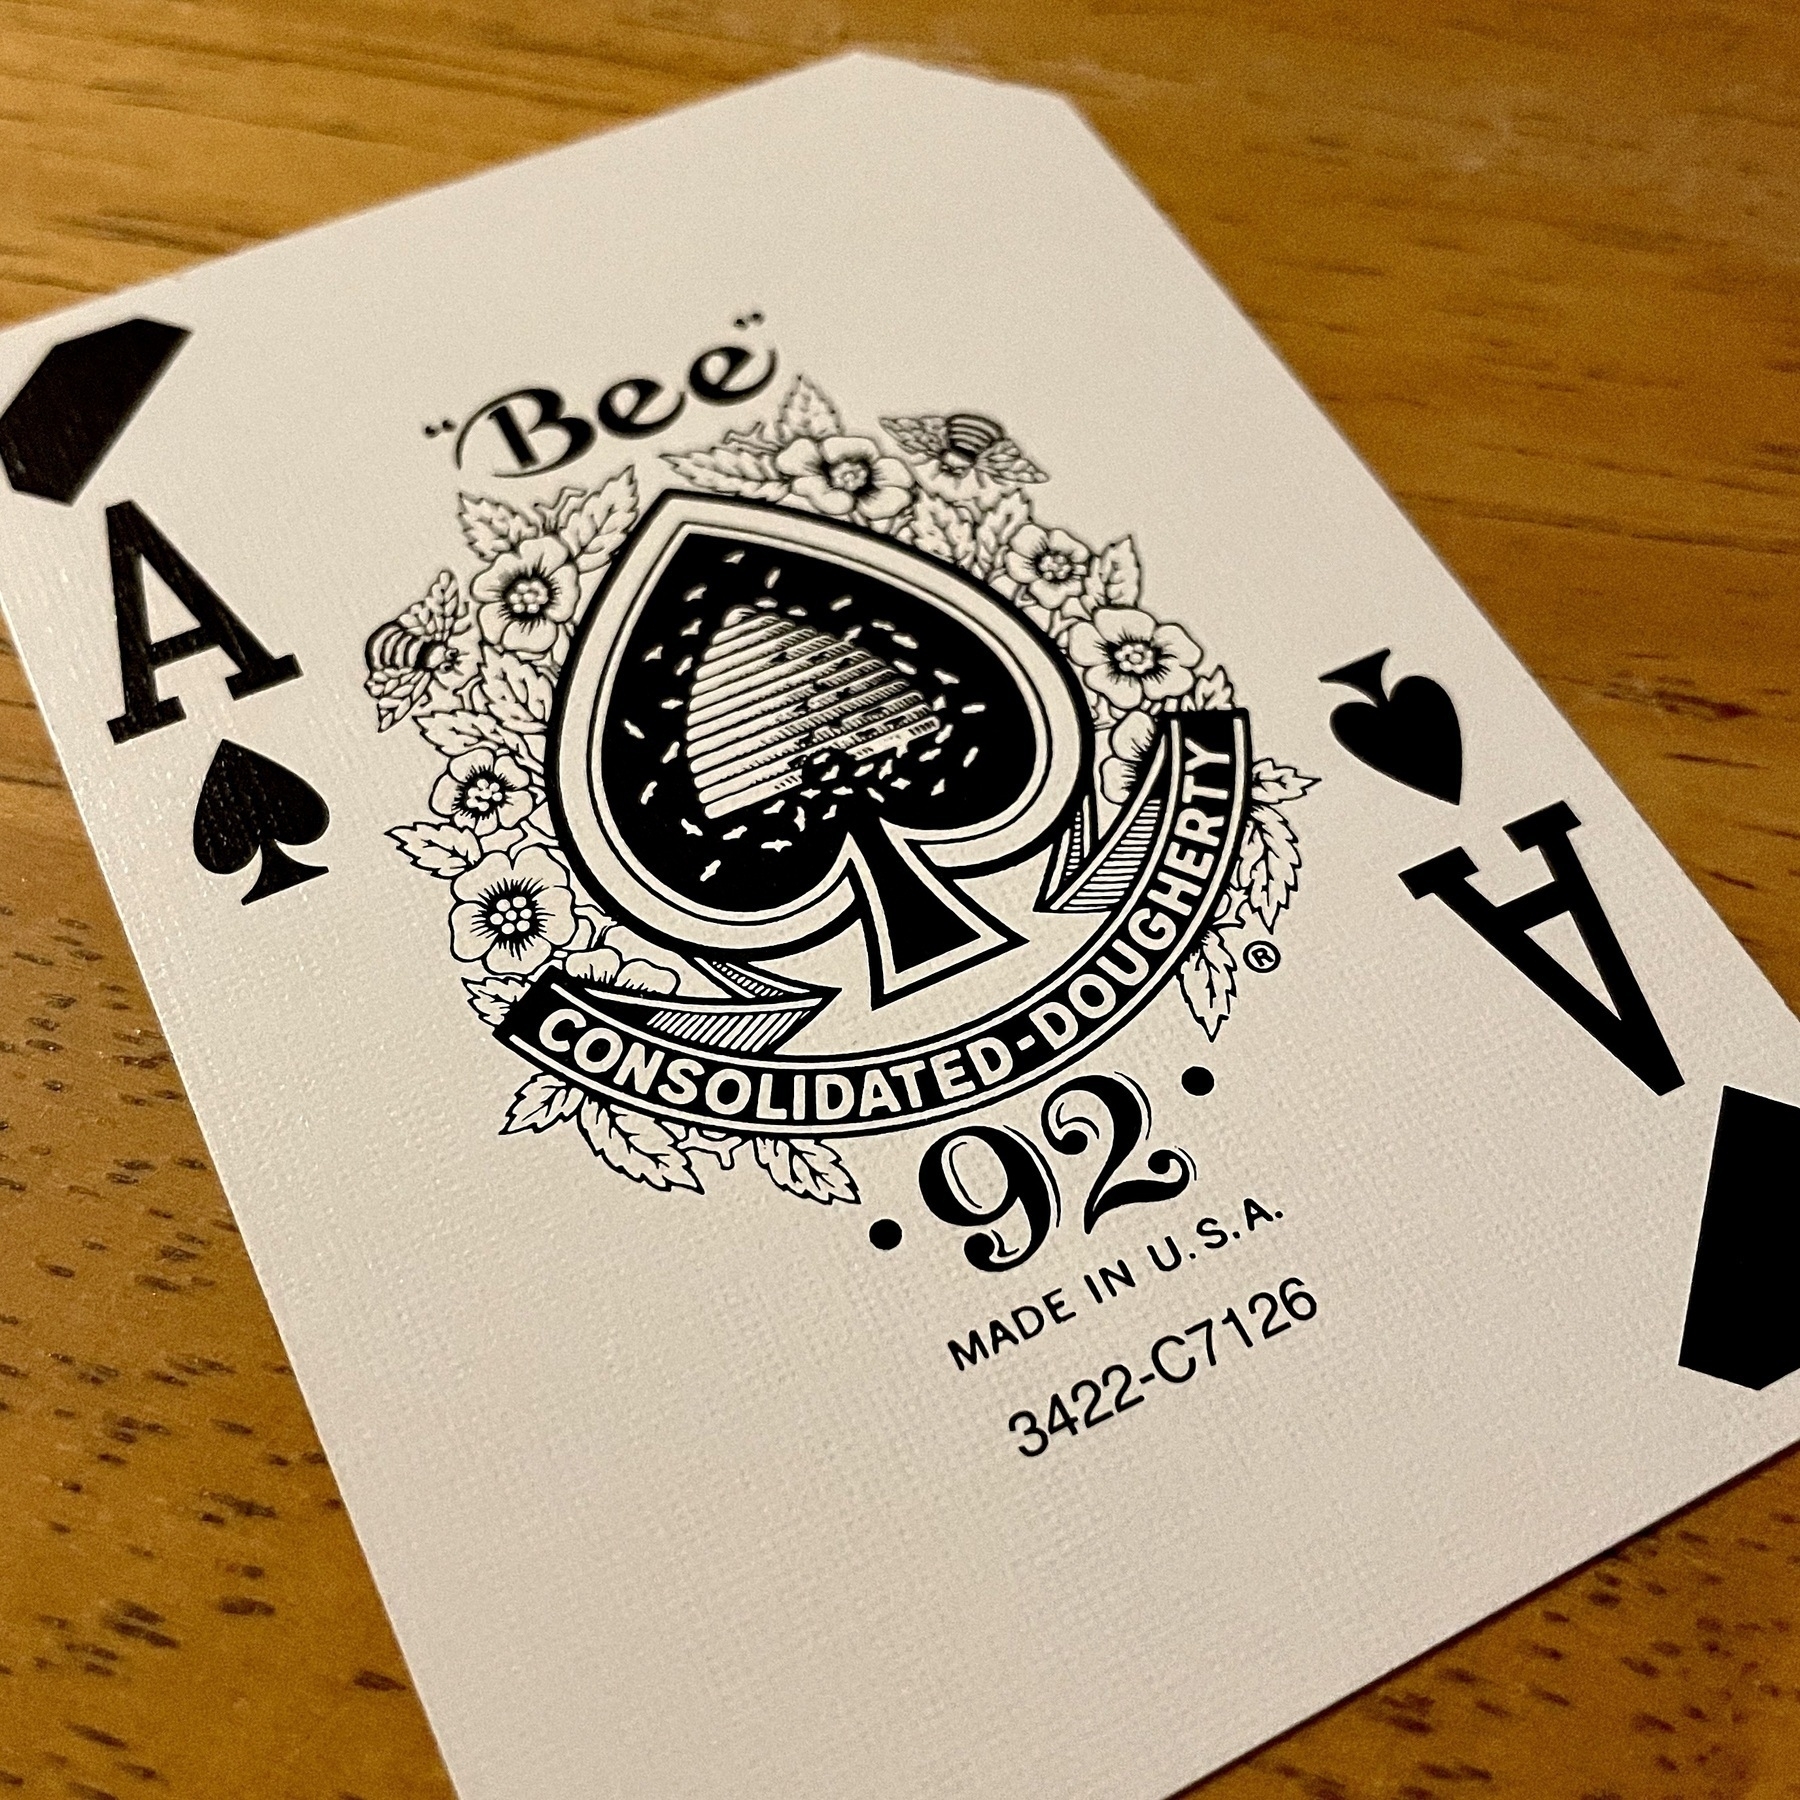 Ace of spades on a table